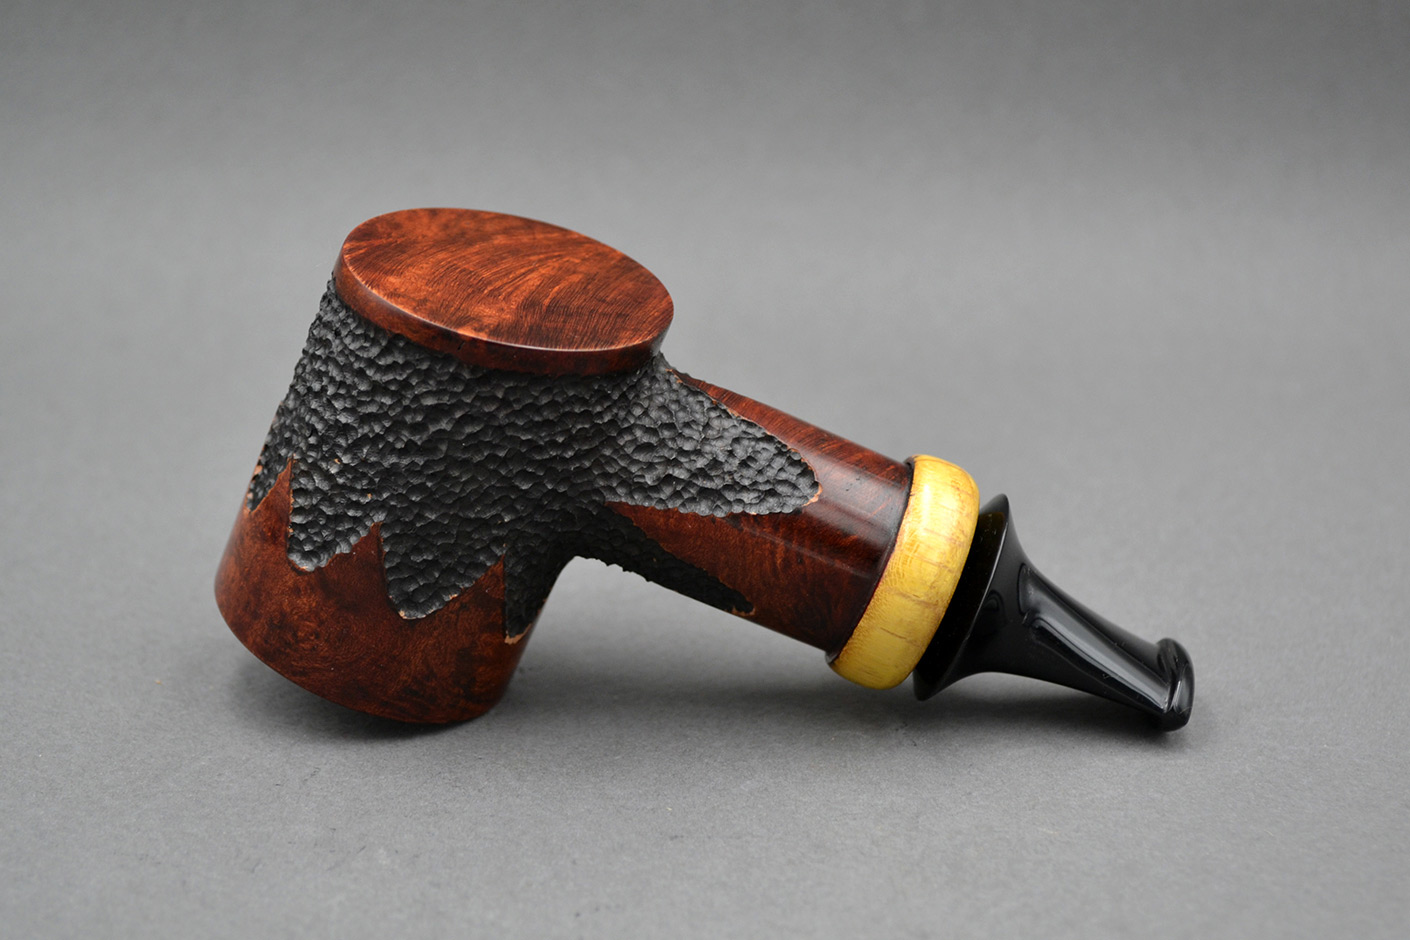 King Reverse Calabash 21133 Handmade Briar Tobacco Pipe by Constantinos Zissis 04